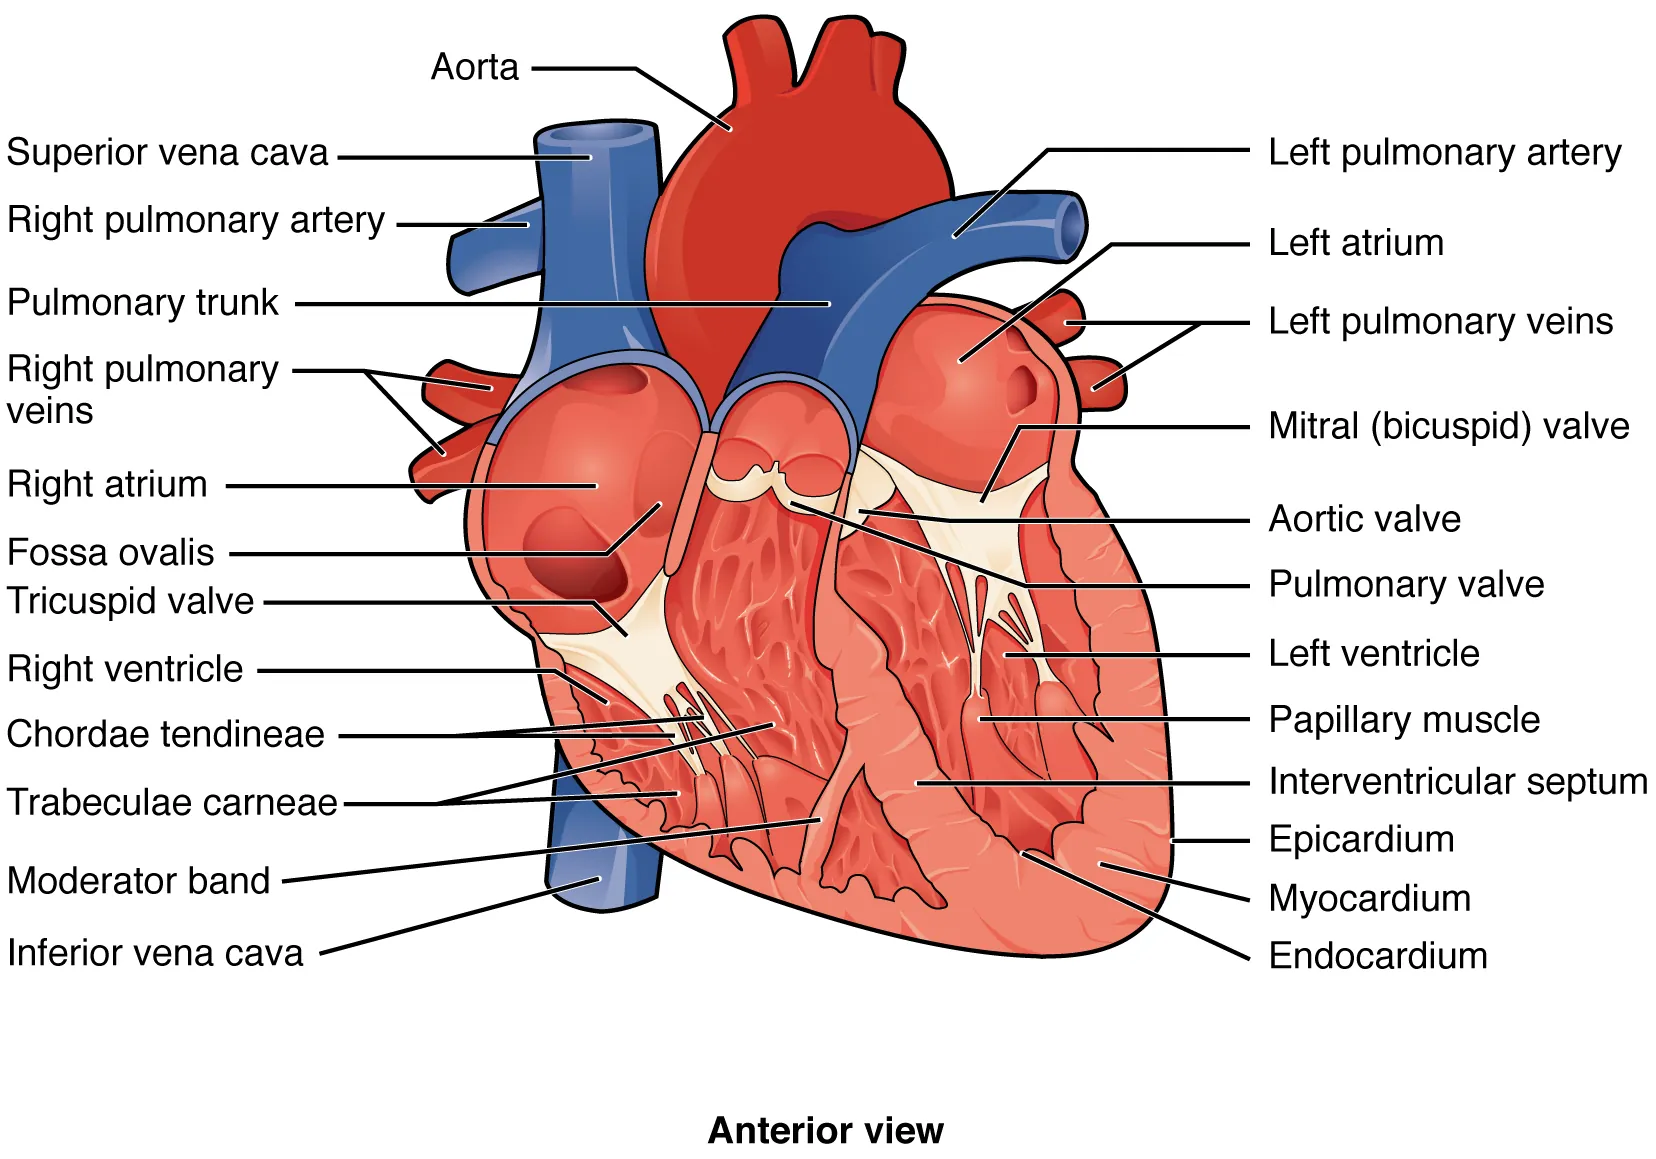 In this figure the top panel shows the image of the heart with the major parts labeled. The bottom left panel shows a photo of the heart with the surface layer peeled off. The images on the bottom right show detailed musculature inside the heart.